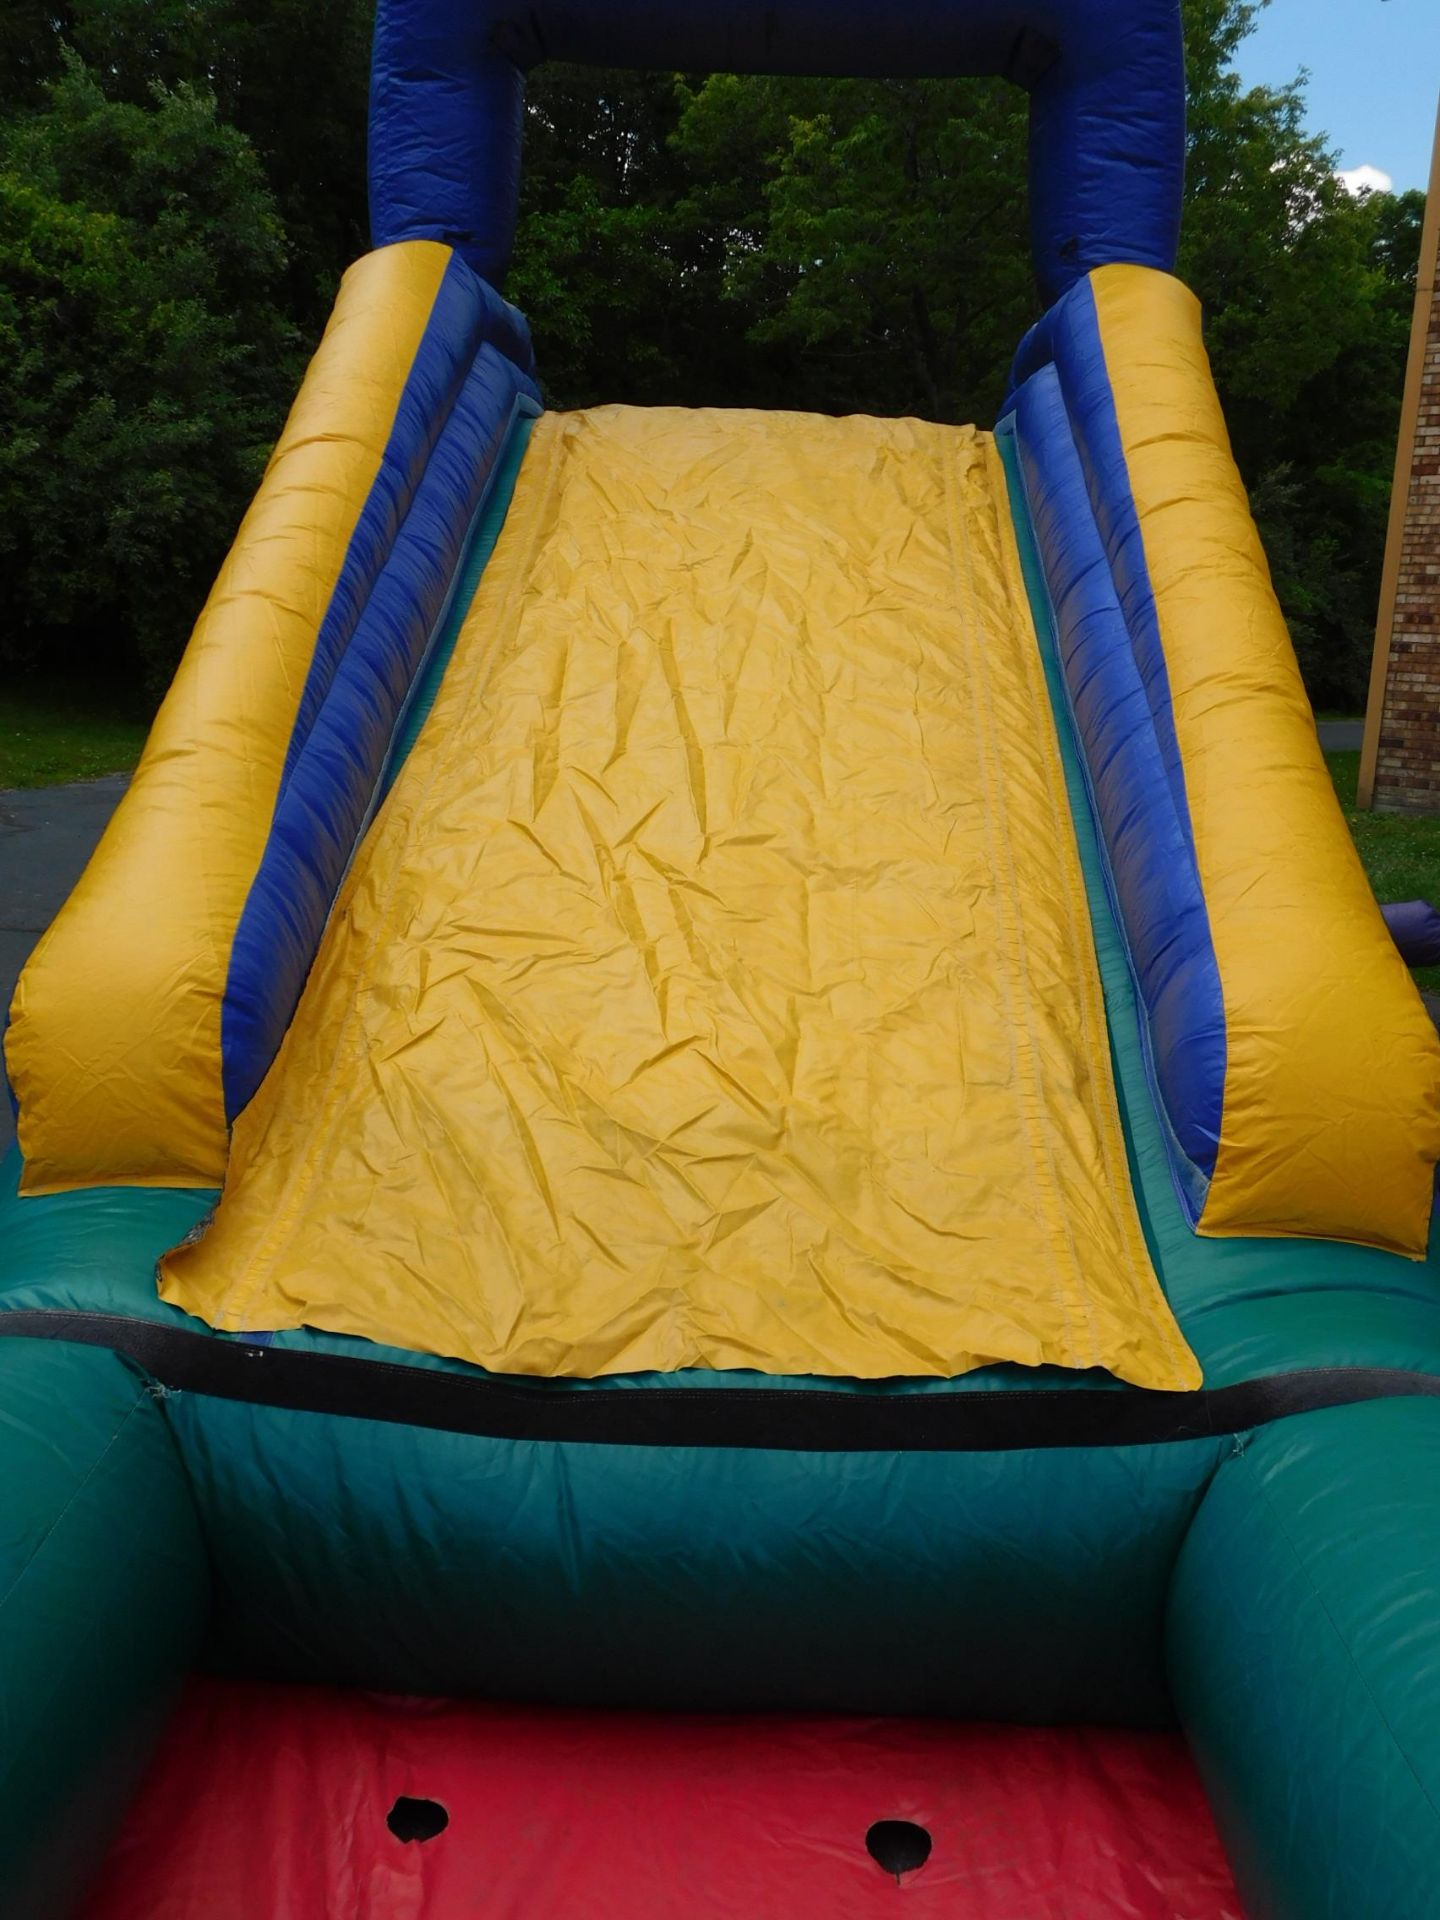 Inflatable Slide 12'Slide 1pc. 1 Blower req. 8'WX30'LX12'H # 99 - Image 6 of 6